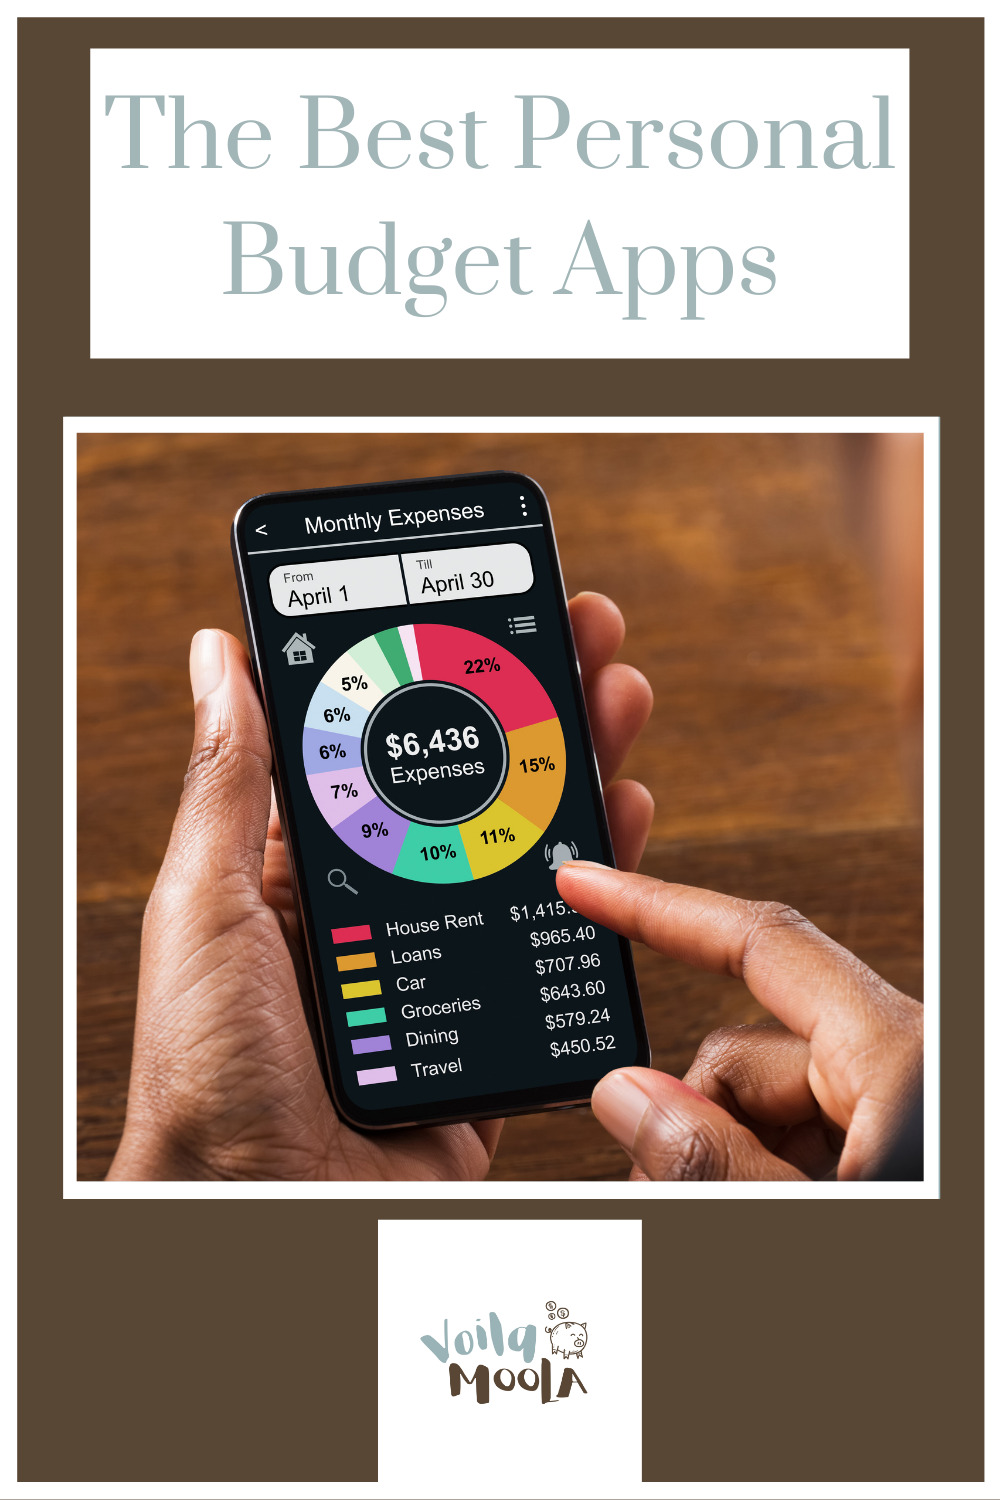 Struggling to budget your finances? Voliamoola.com knows an easy way to keep budget in line. Try these personal budget apps today. Save money, time and lots of stress. Just keep reading to learn more.